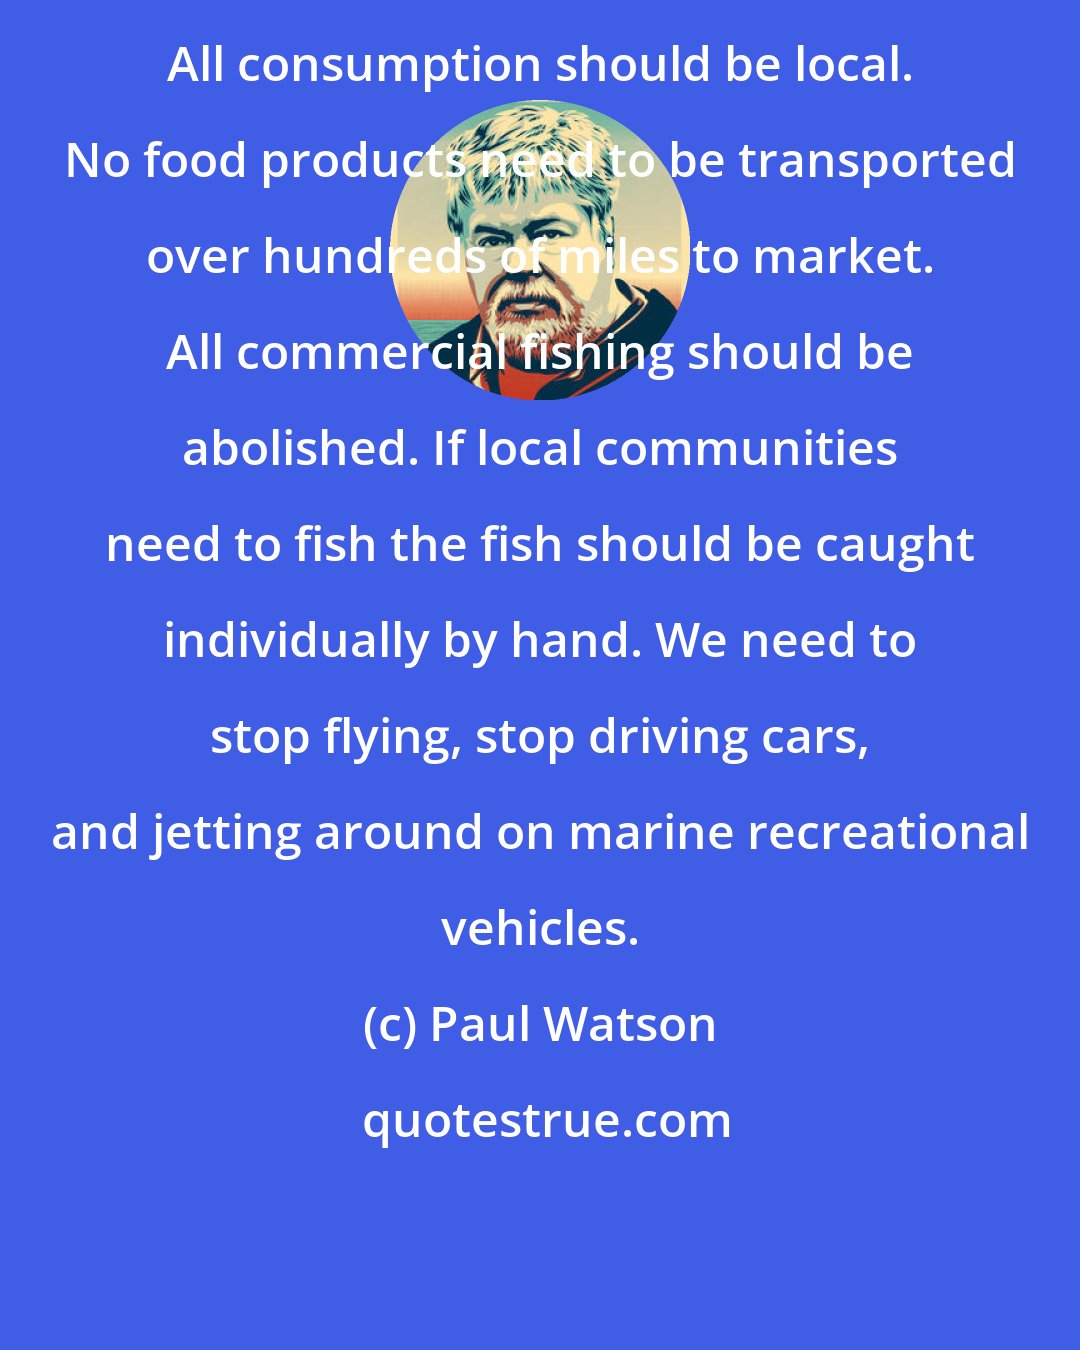 Paul Watson: All consumption should be local. No food products need to be transported over hundreds of miles to market. All commercial fishing should be abolished. If local communities need to fish the fish should be caught individually by hand. We need to stop flying, stop driving cars, and jetting around on marine recreational vehicles.